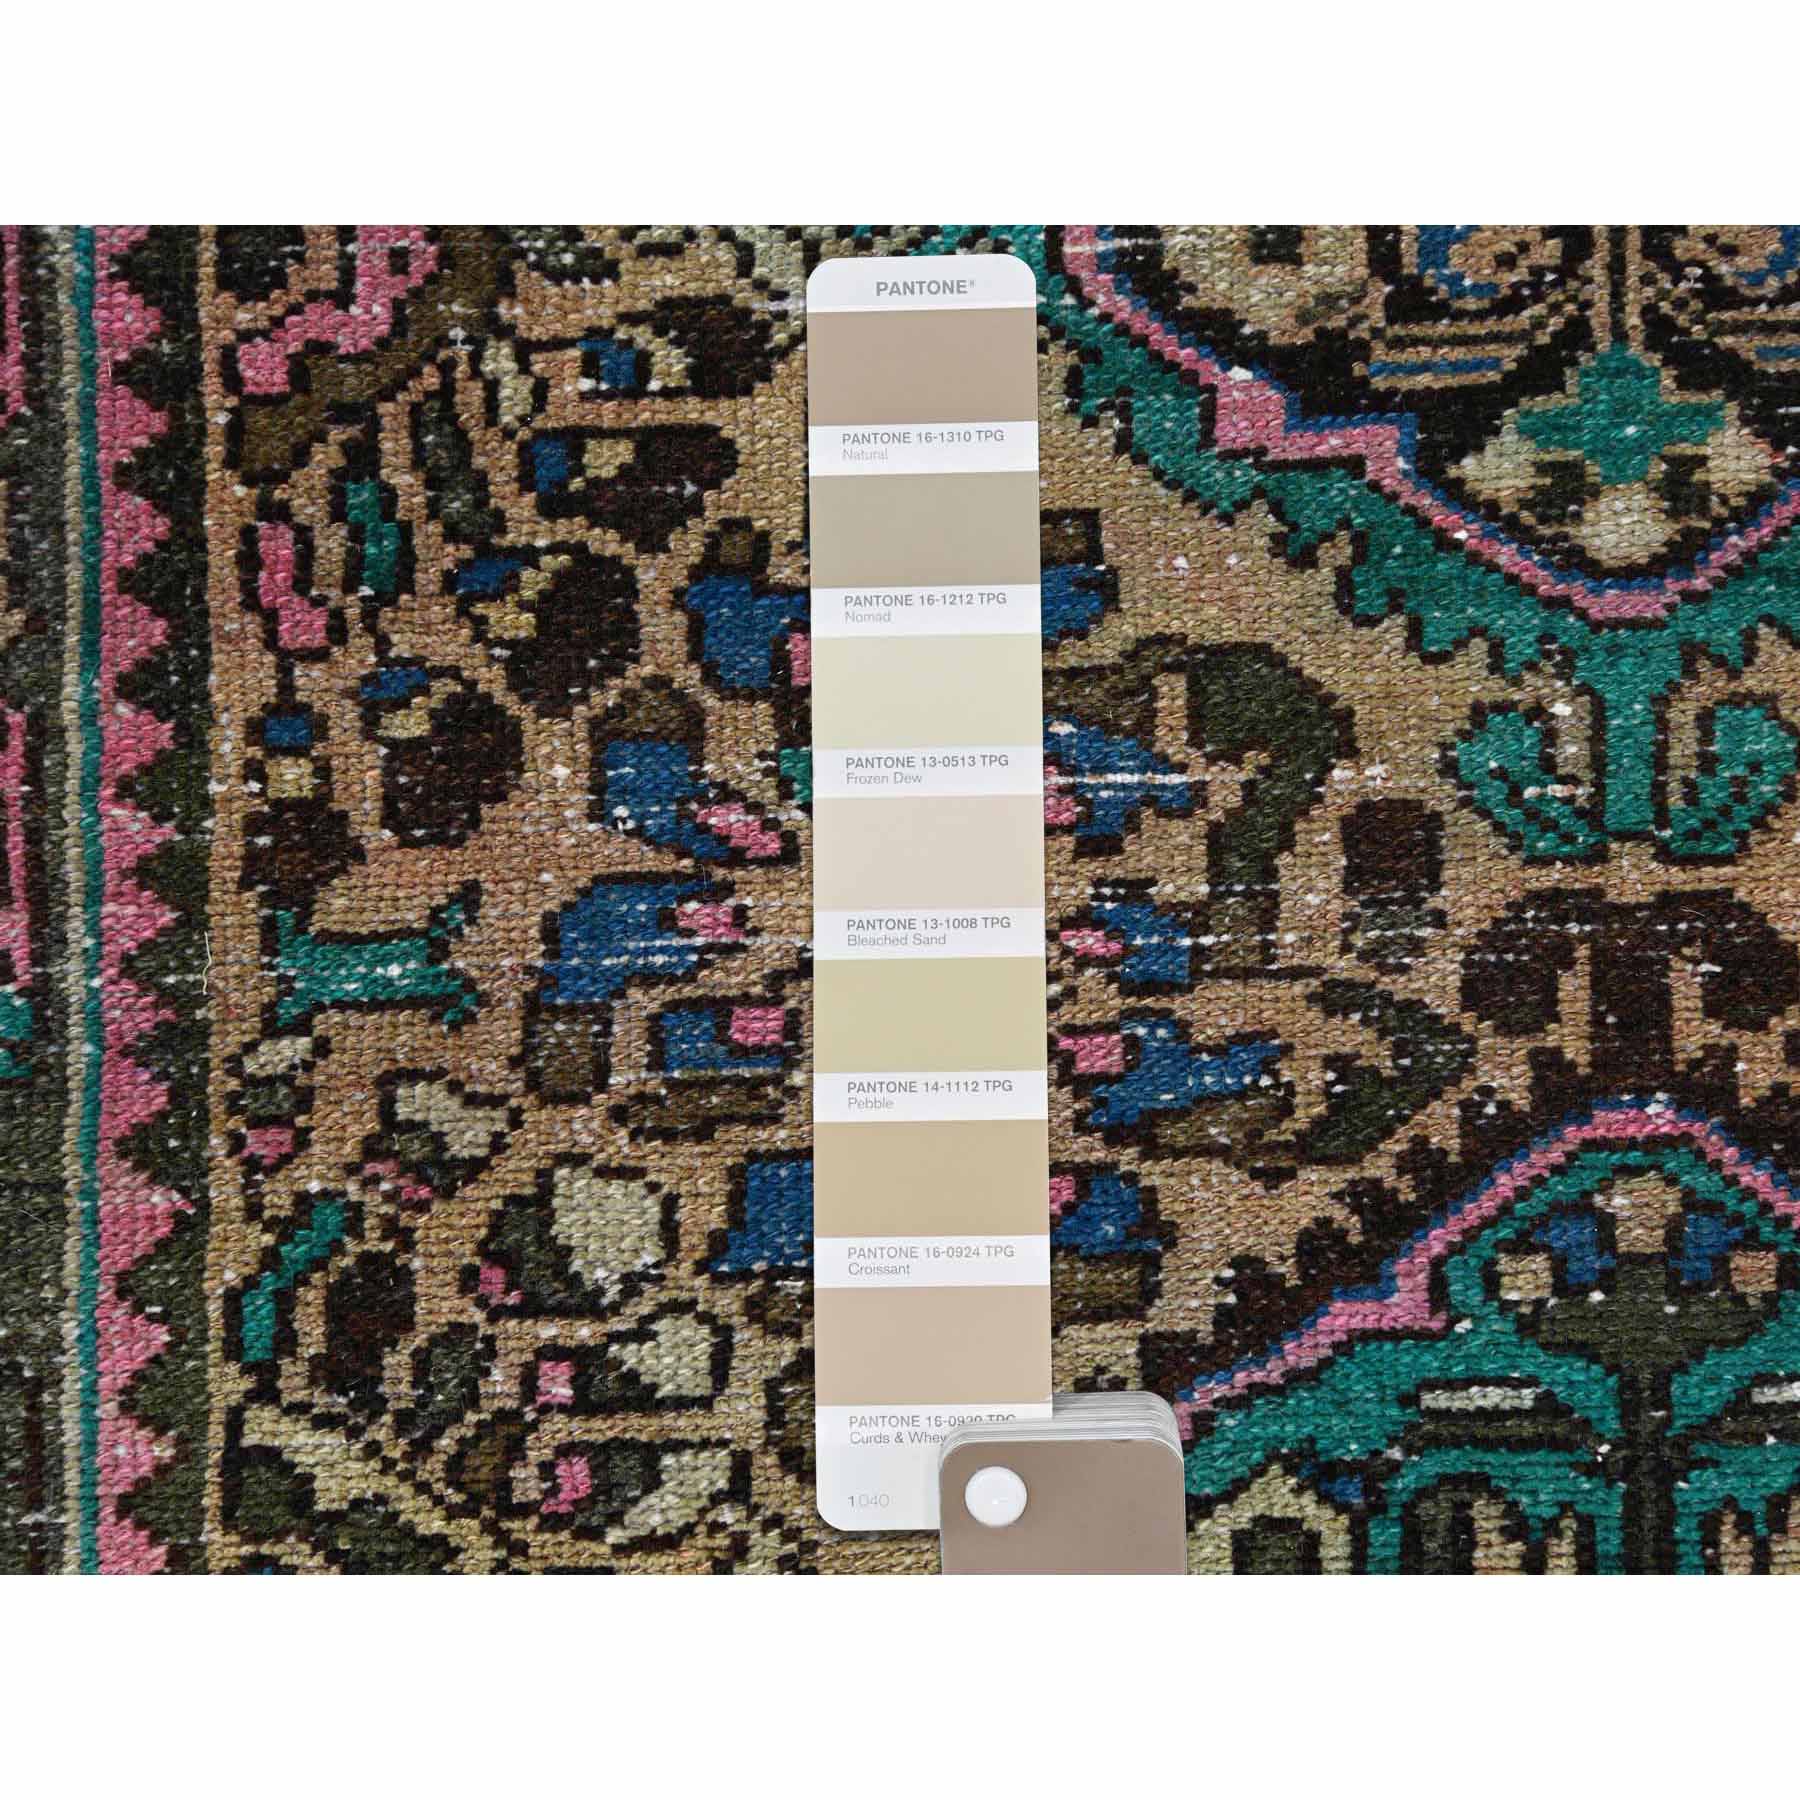 Overdyed-Vintage-Hand-Knotted-Rug-405710